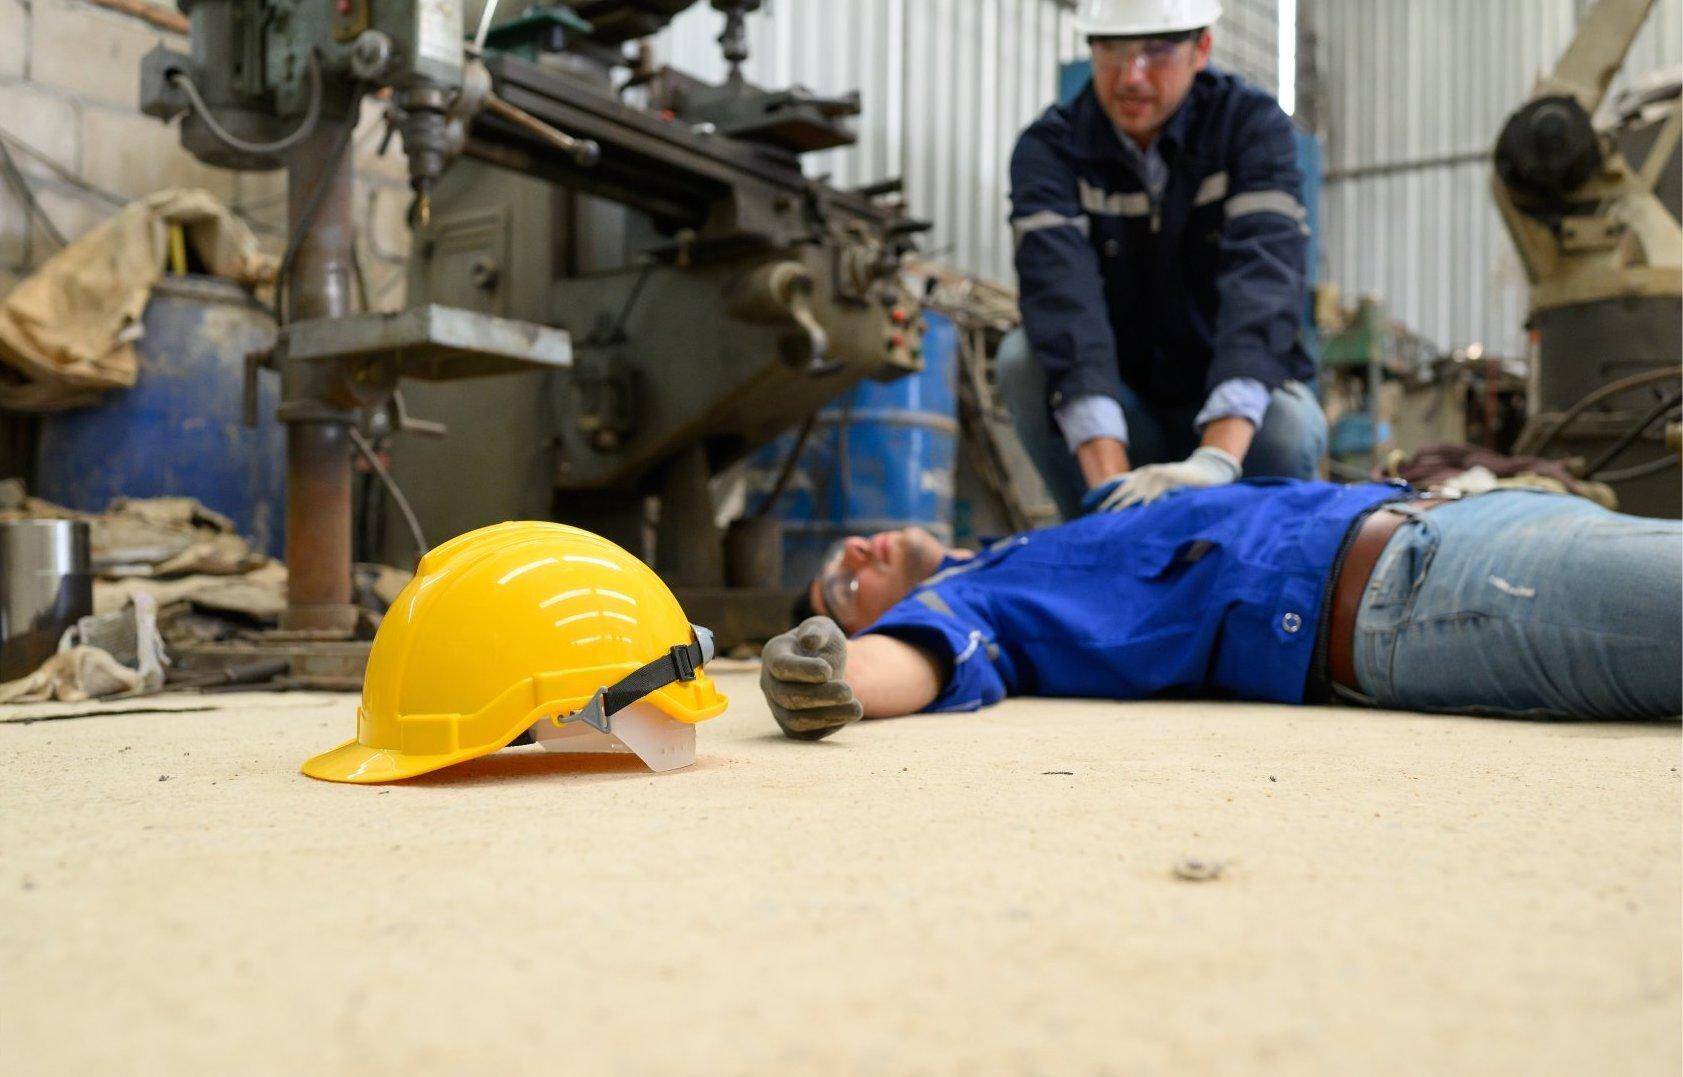 An unconscious man who has been injured on the job who will file for workers compensation in Milledgeville, Georgia